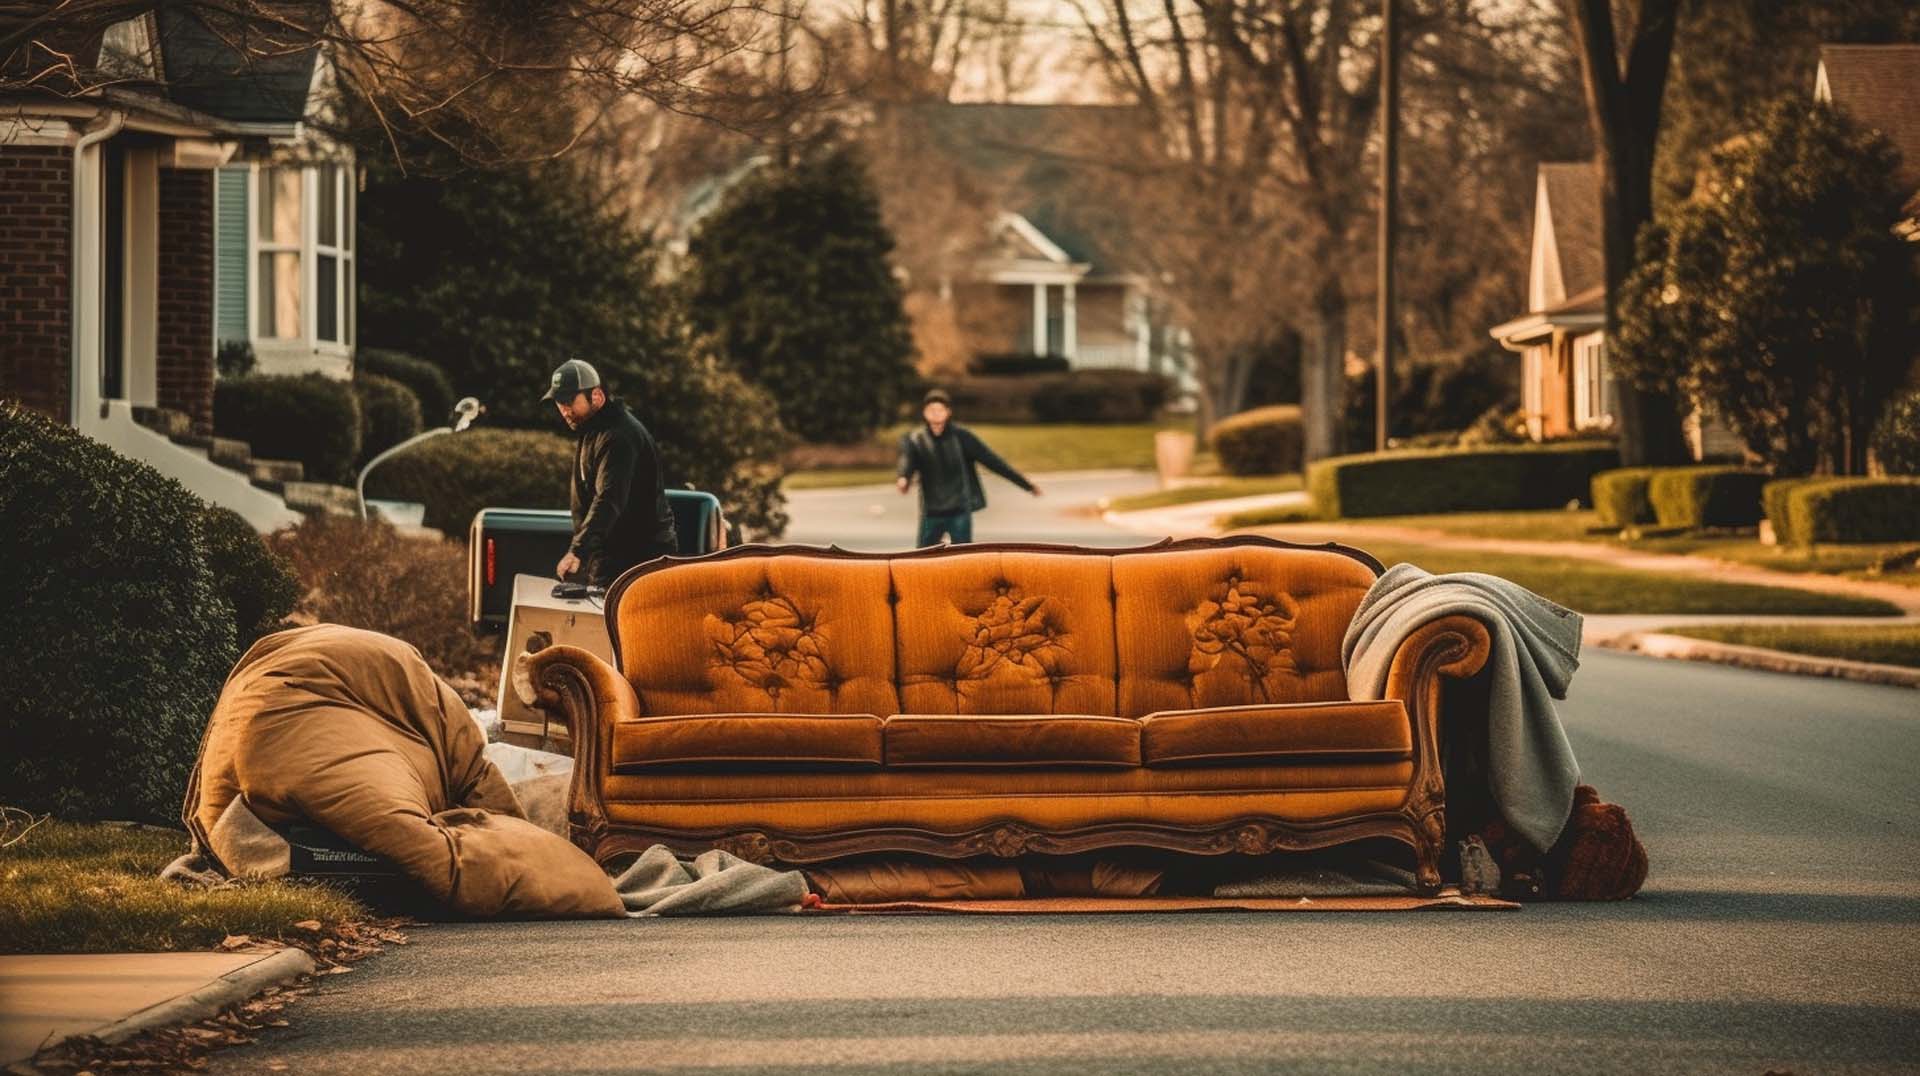 Residential Junk Removal Services in Renfrew